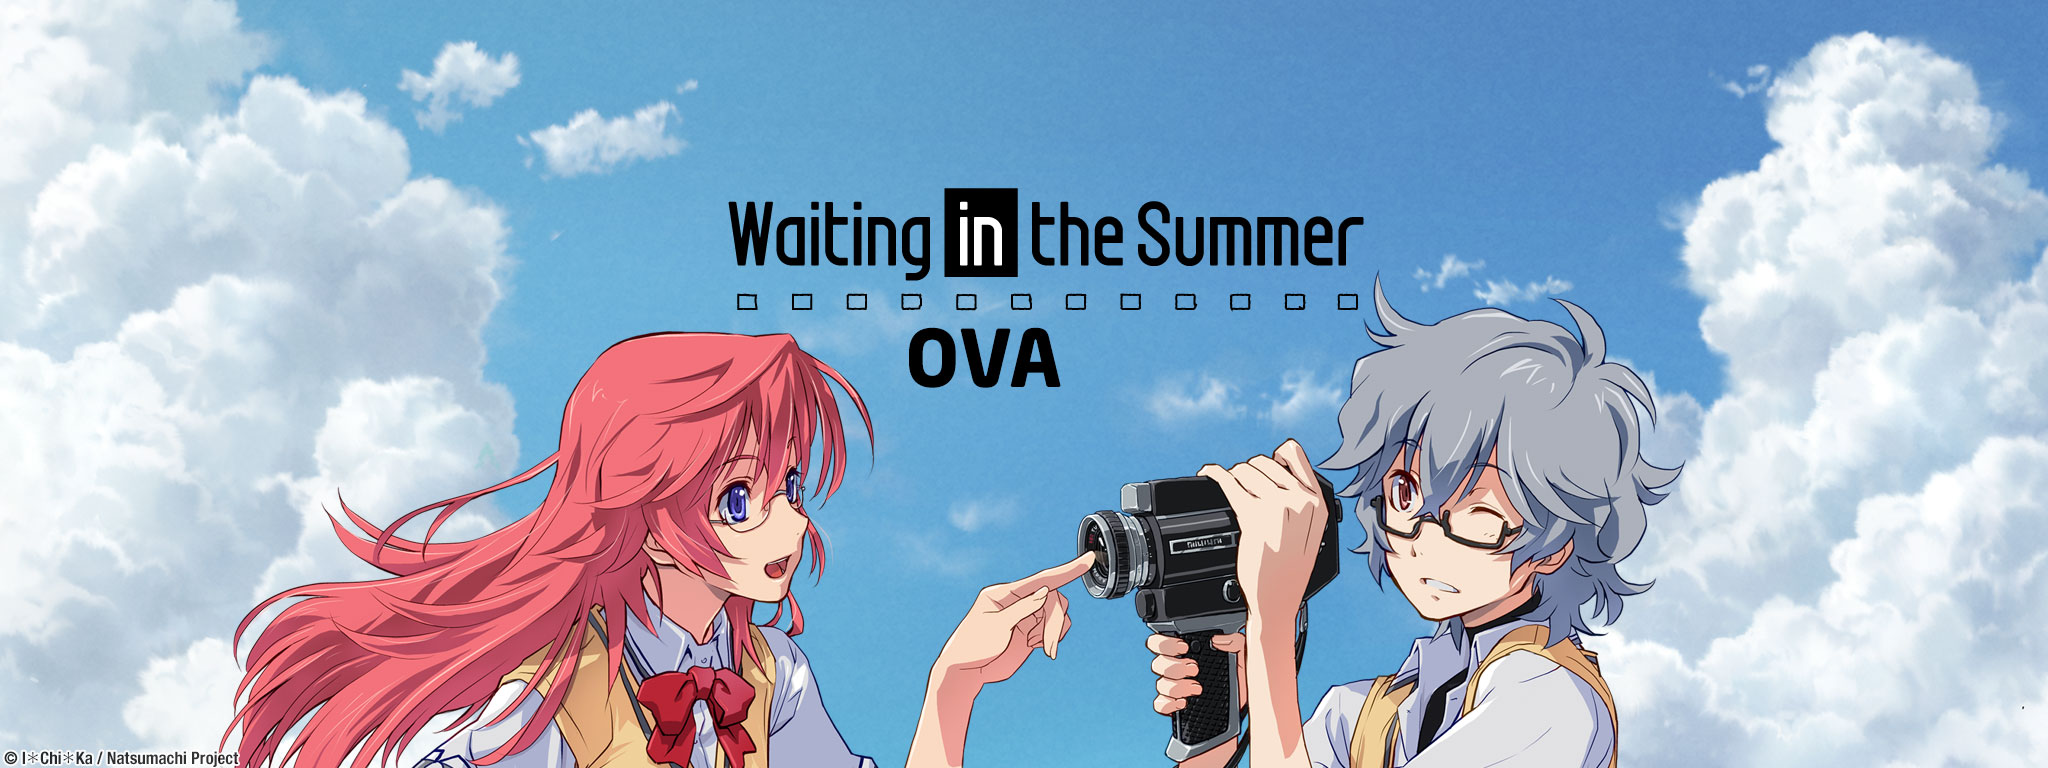 Title Art for Waiting in the Summer OVA